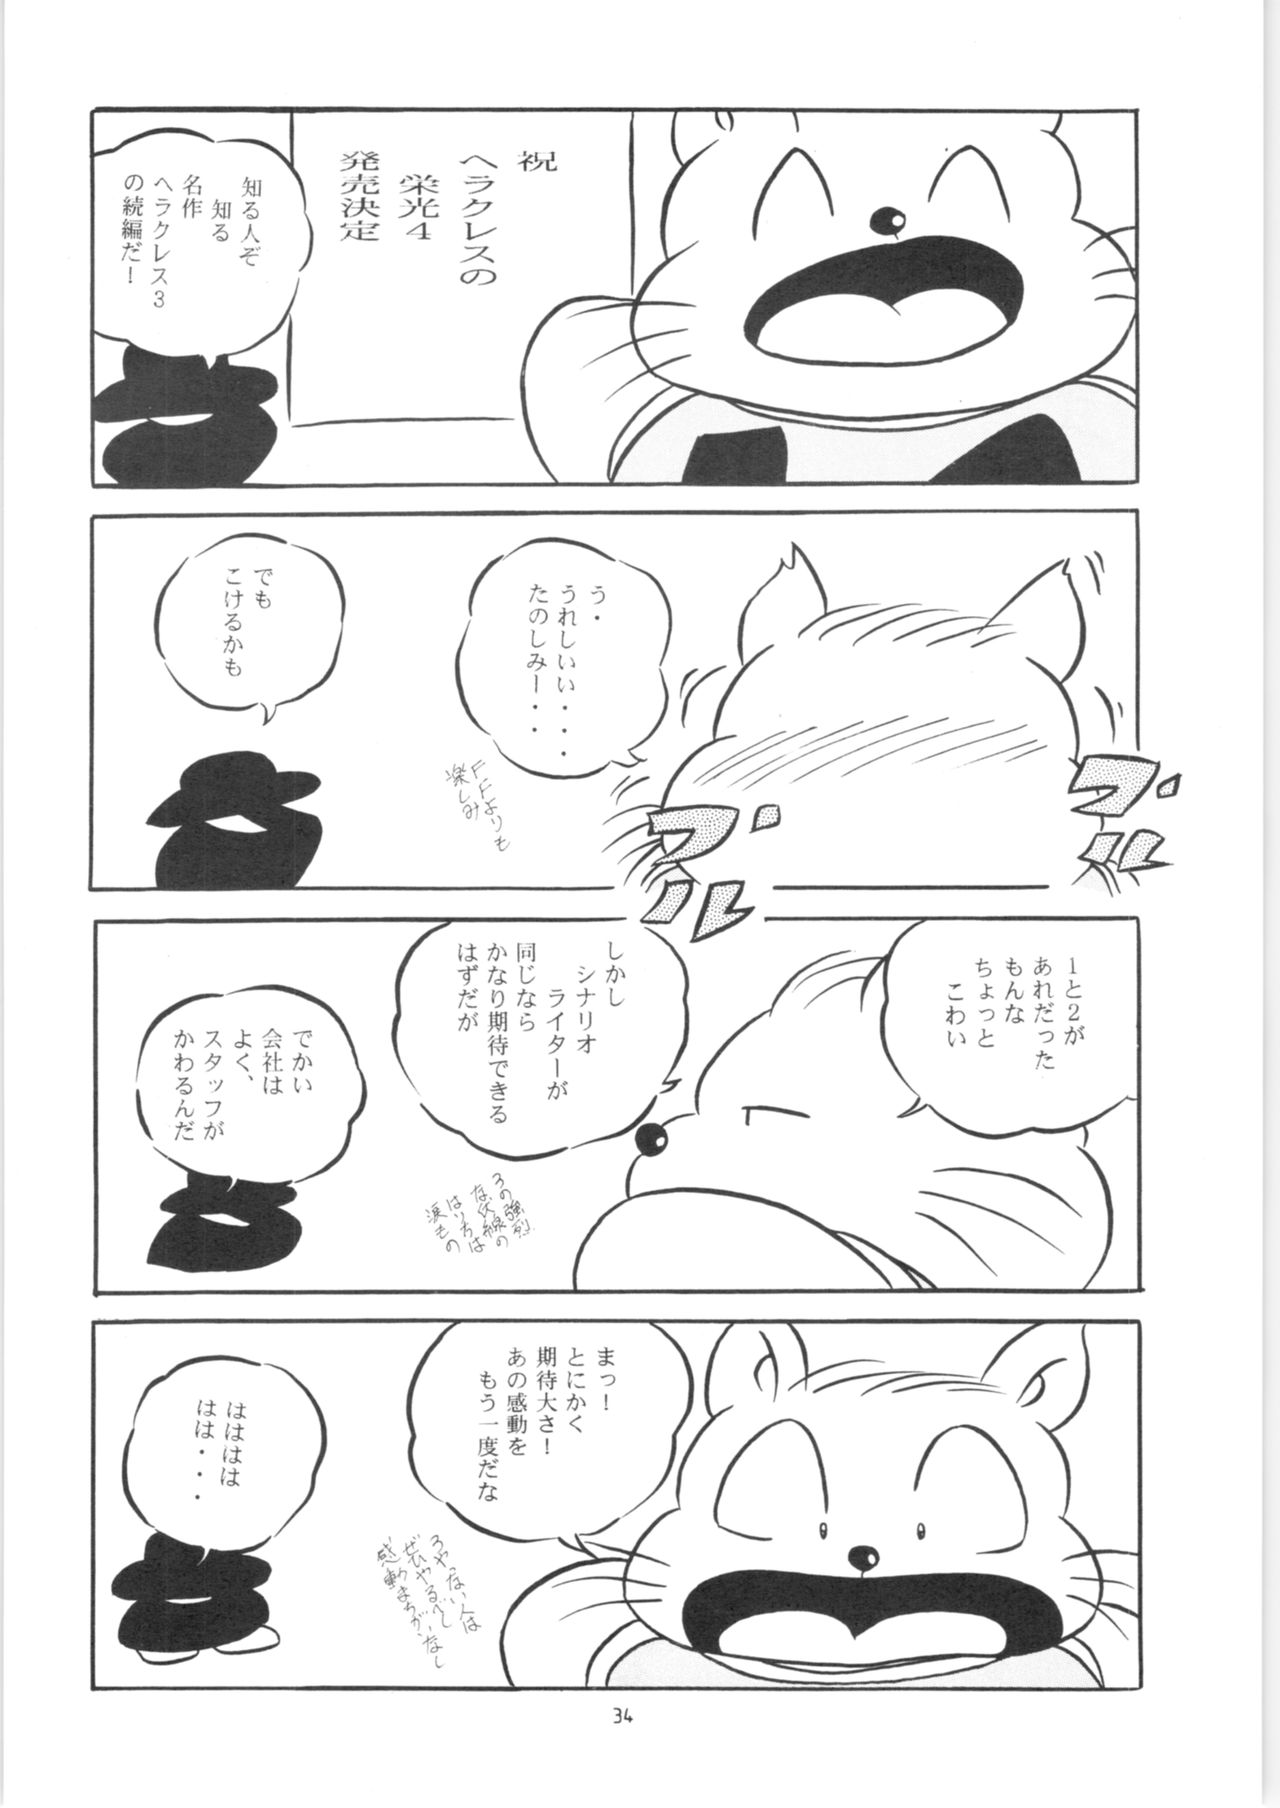 [C-COMPANY] C-COMPANY SPECIAL STAGE 14 (Ranma 1/2) page 35 full